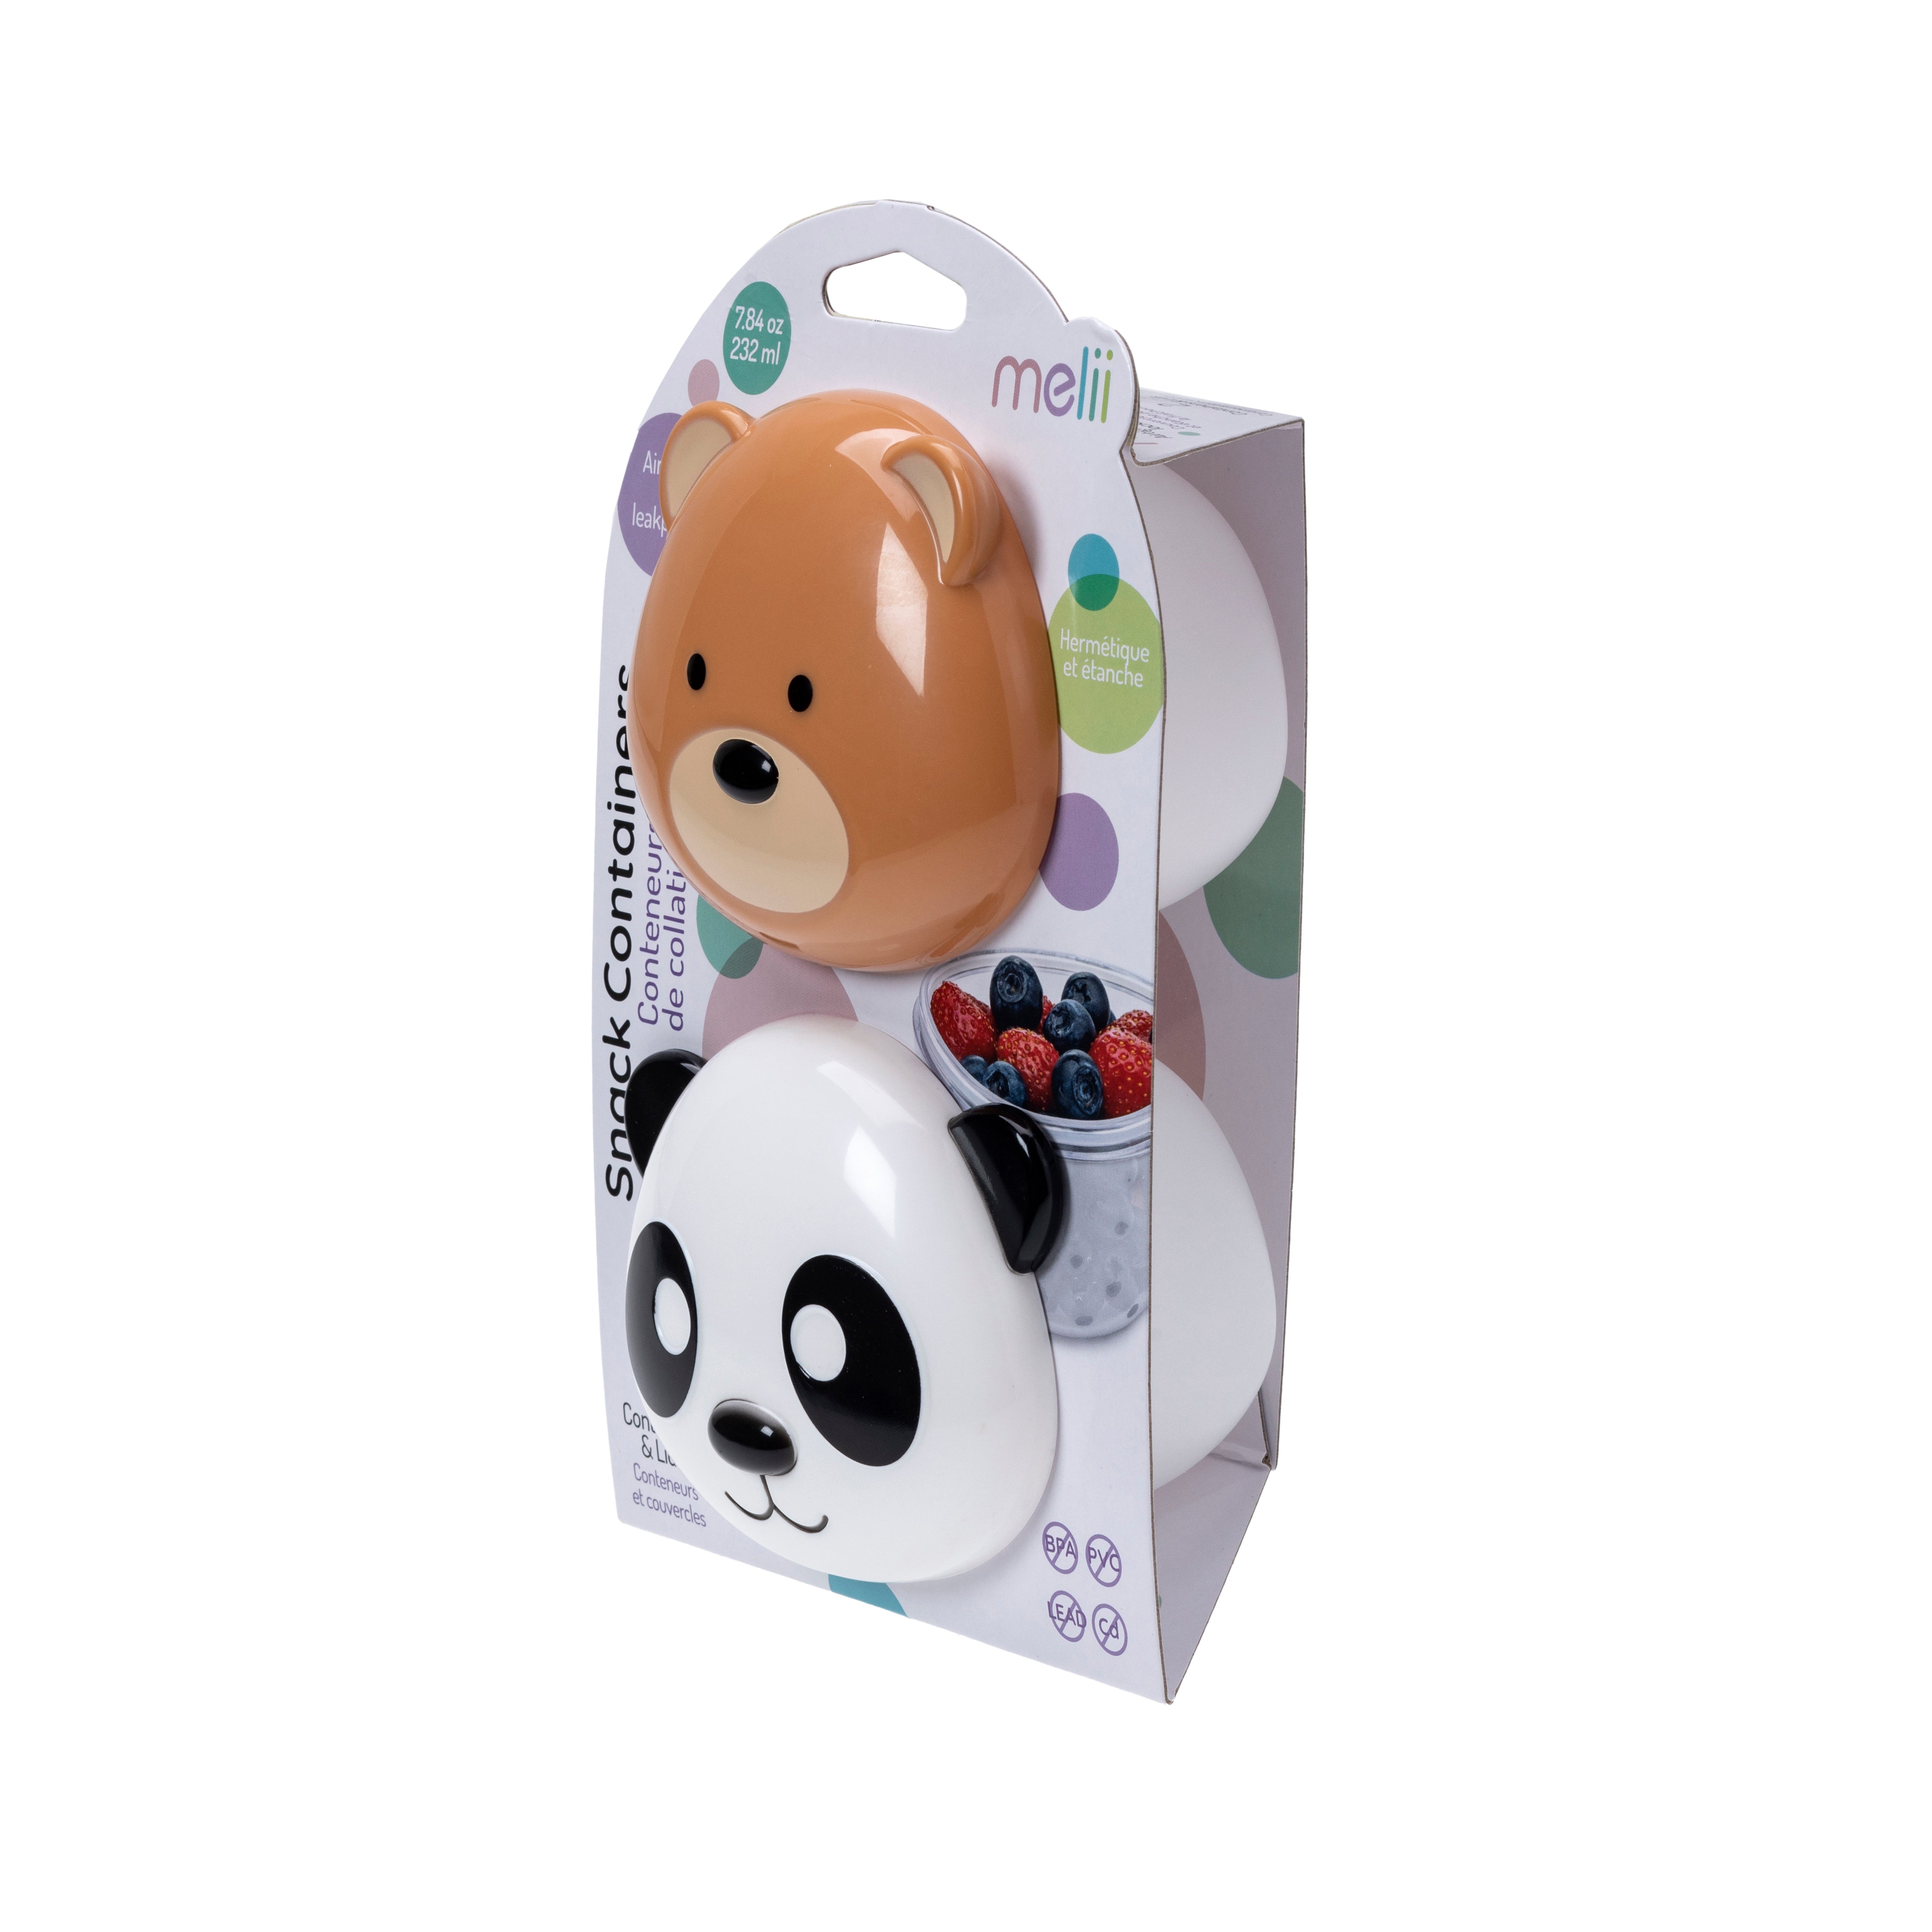 melii-snack-container-bear-panda-2-pack-pp-base